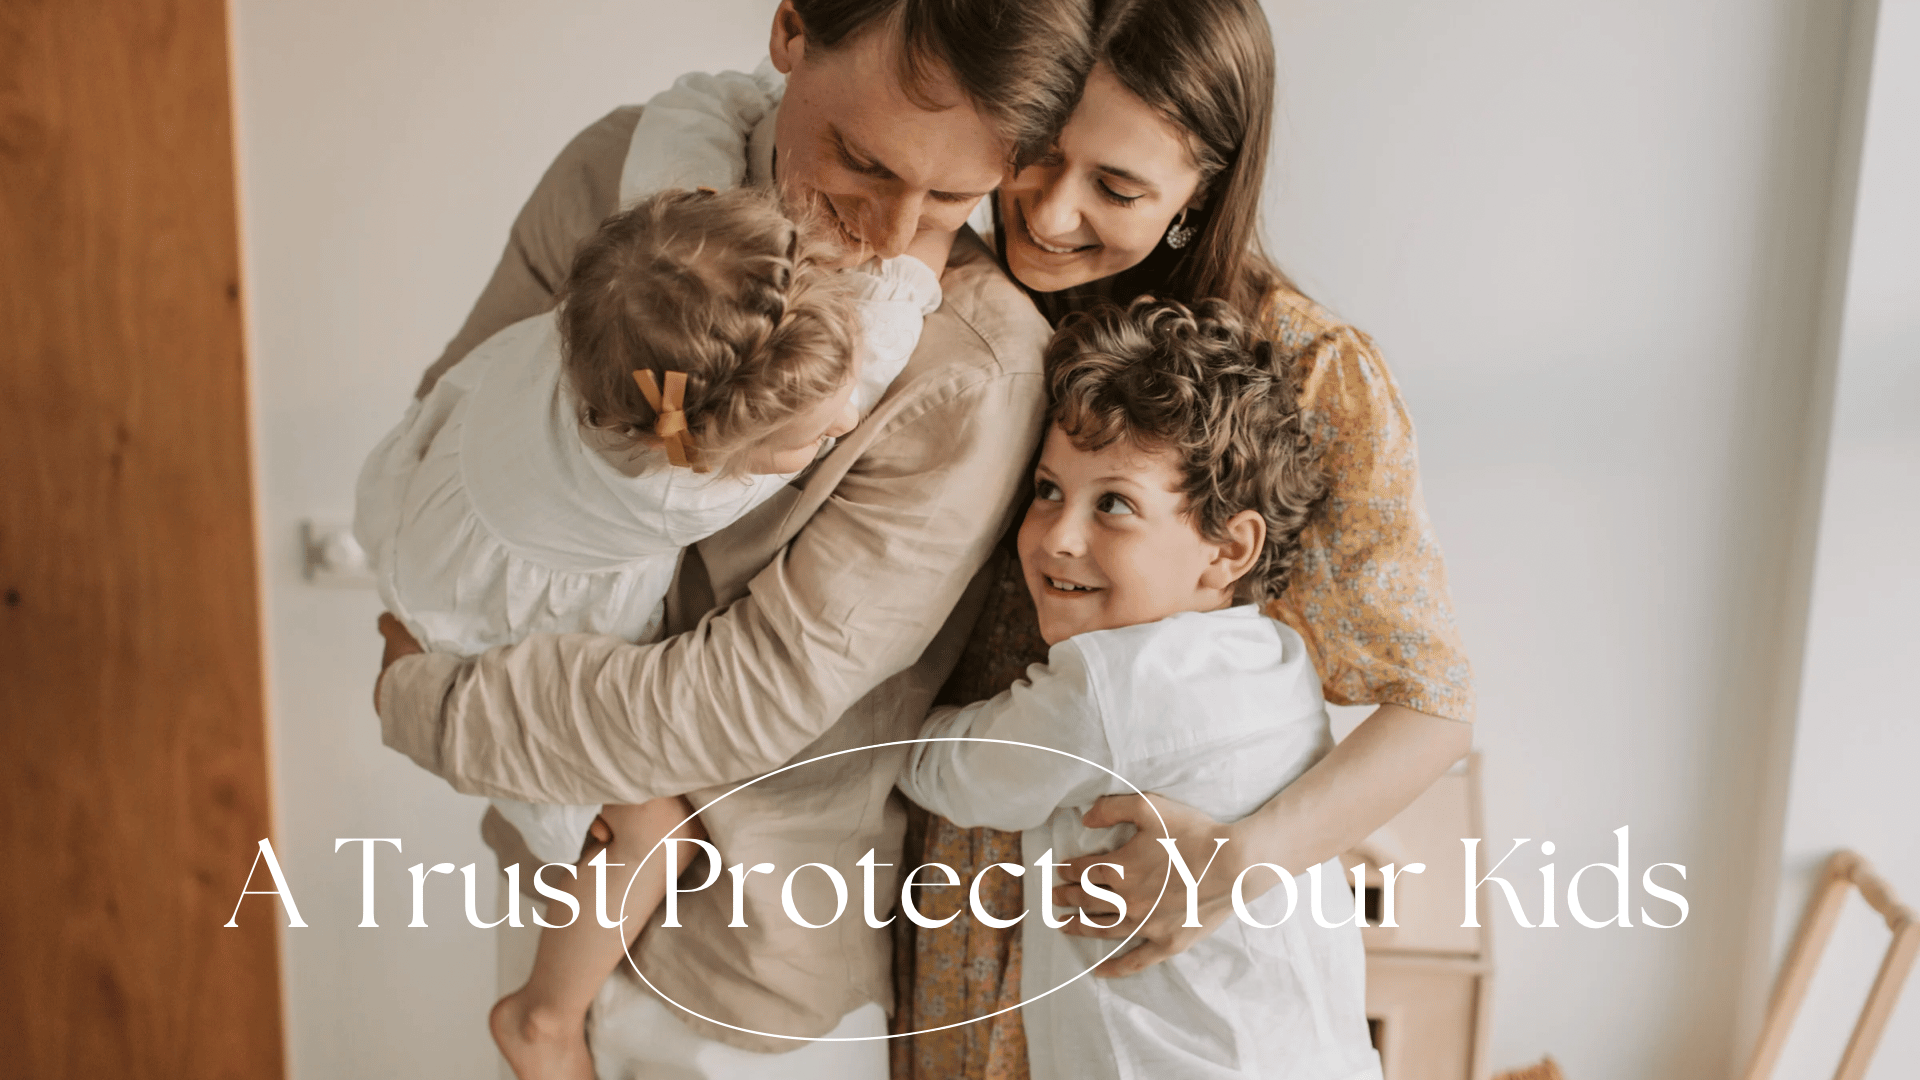 Protect your kids (1)